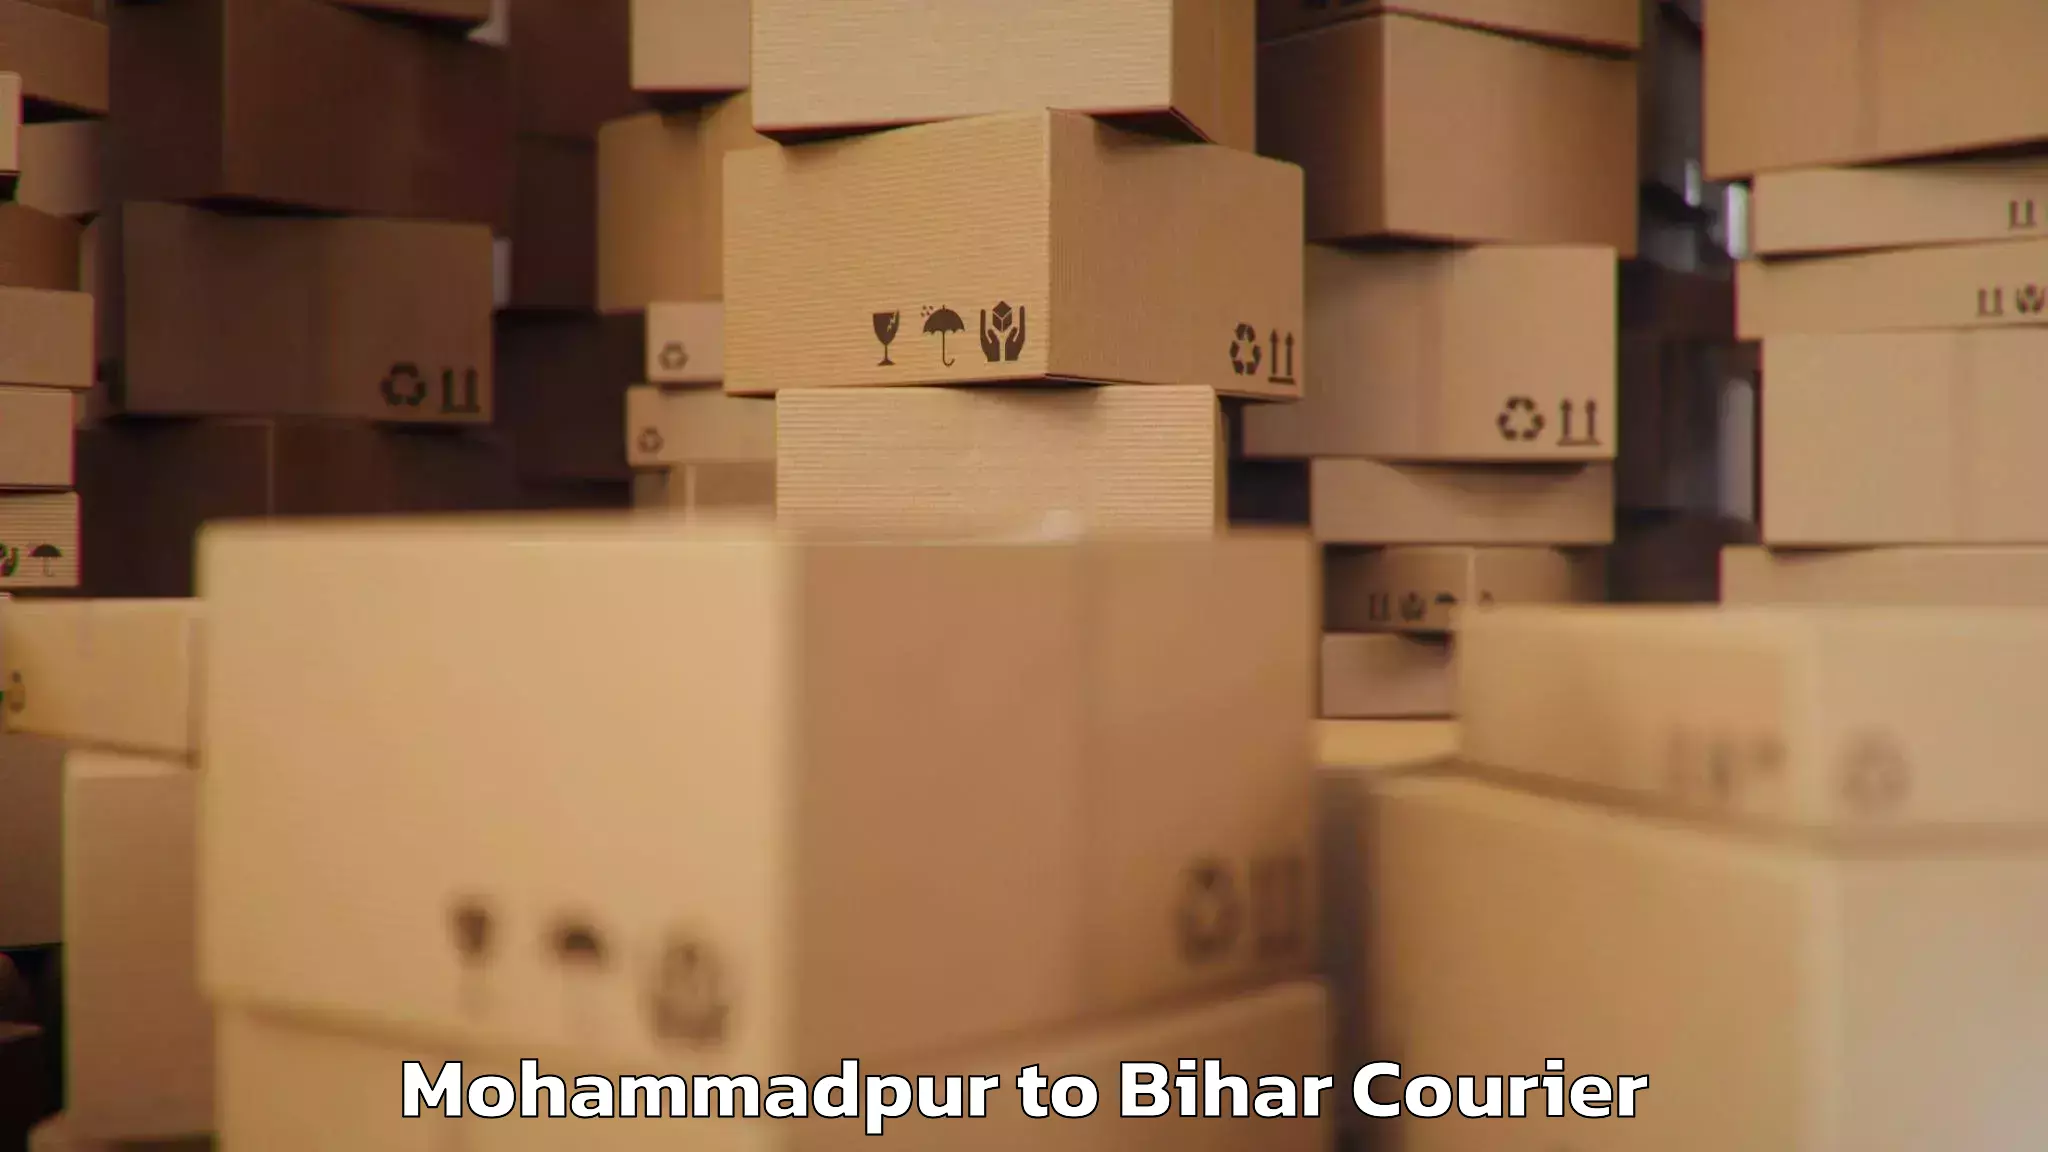 Hassle-free luggage shipping in Mohammadpur to Kharagpur Munger